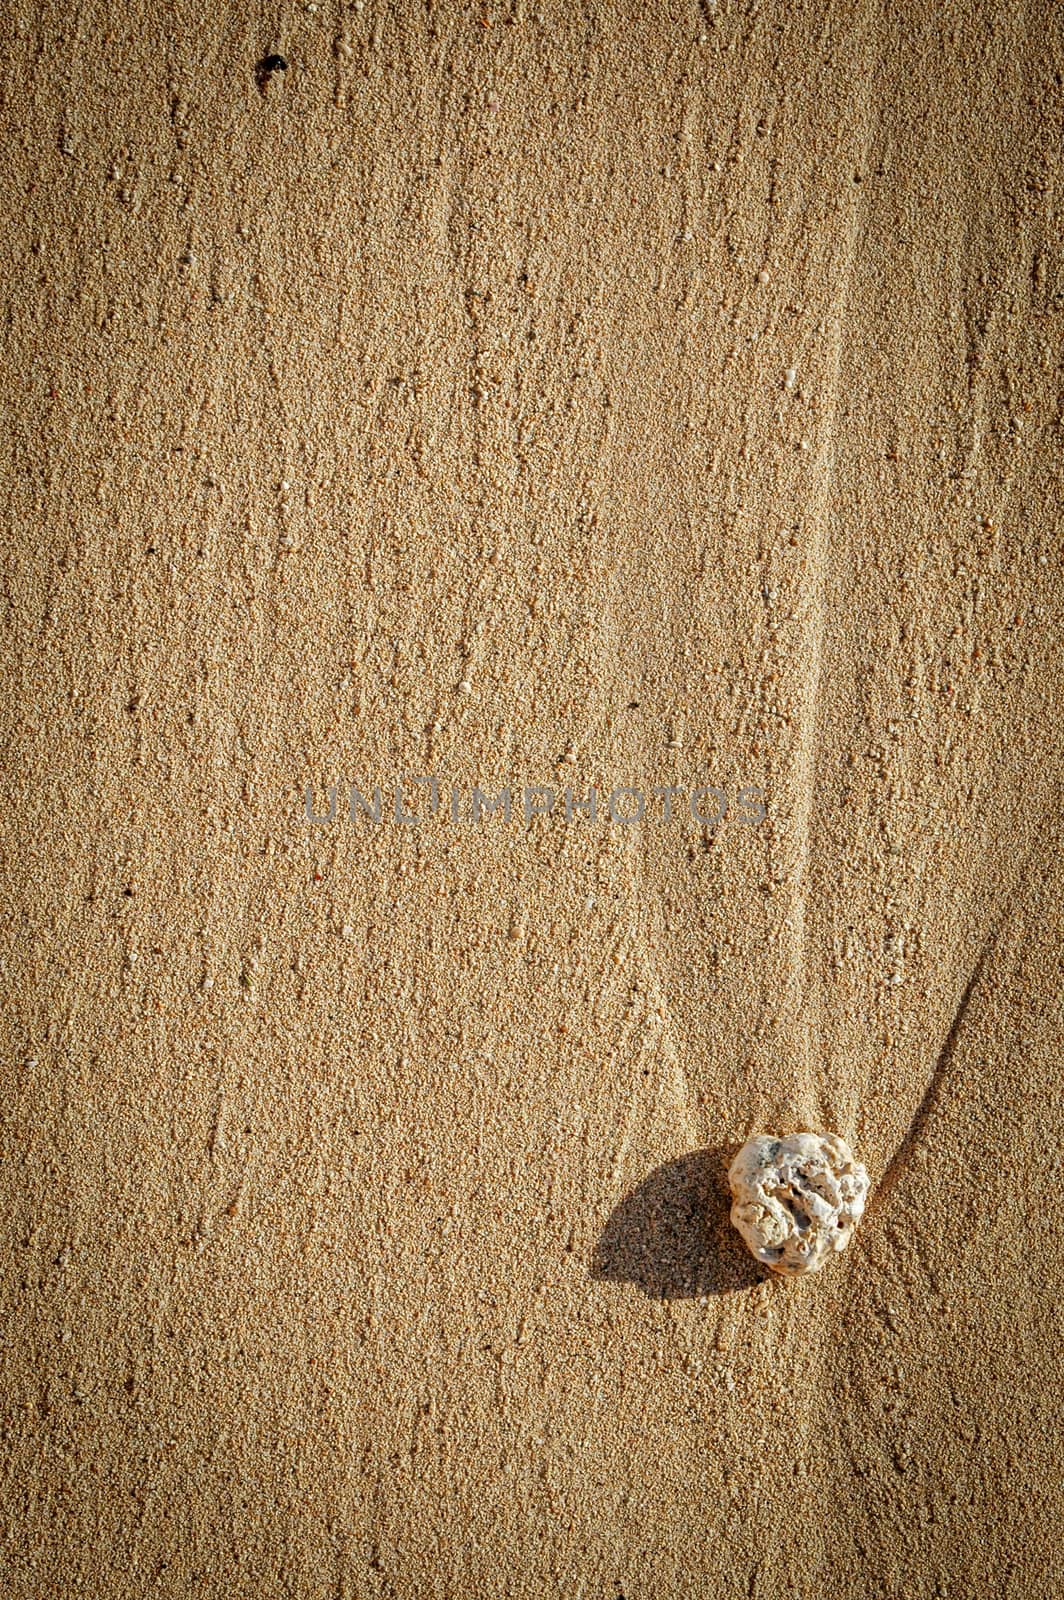 Vacation Image Of Single Piece Of Coral On A Sandy Beach